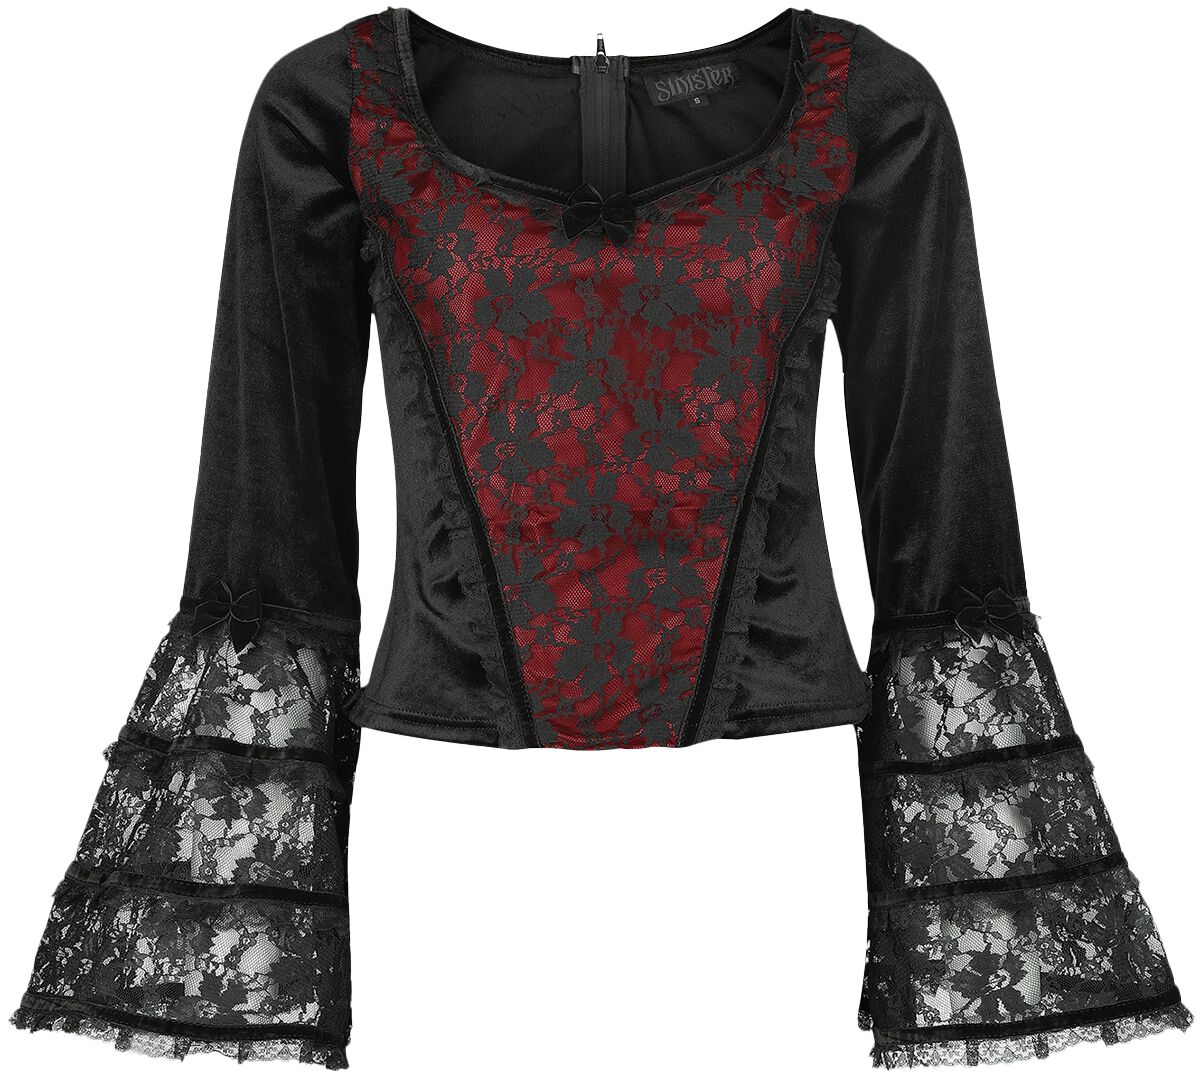 Image of Maglia Maniche Lunghe Gothic di Sinister Gothic - Gothic Longsleeve - S a XXL - Donna - nero/rosso